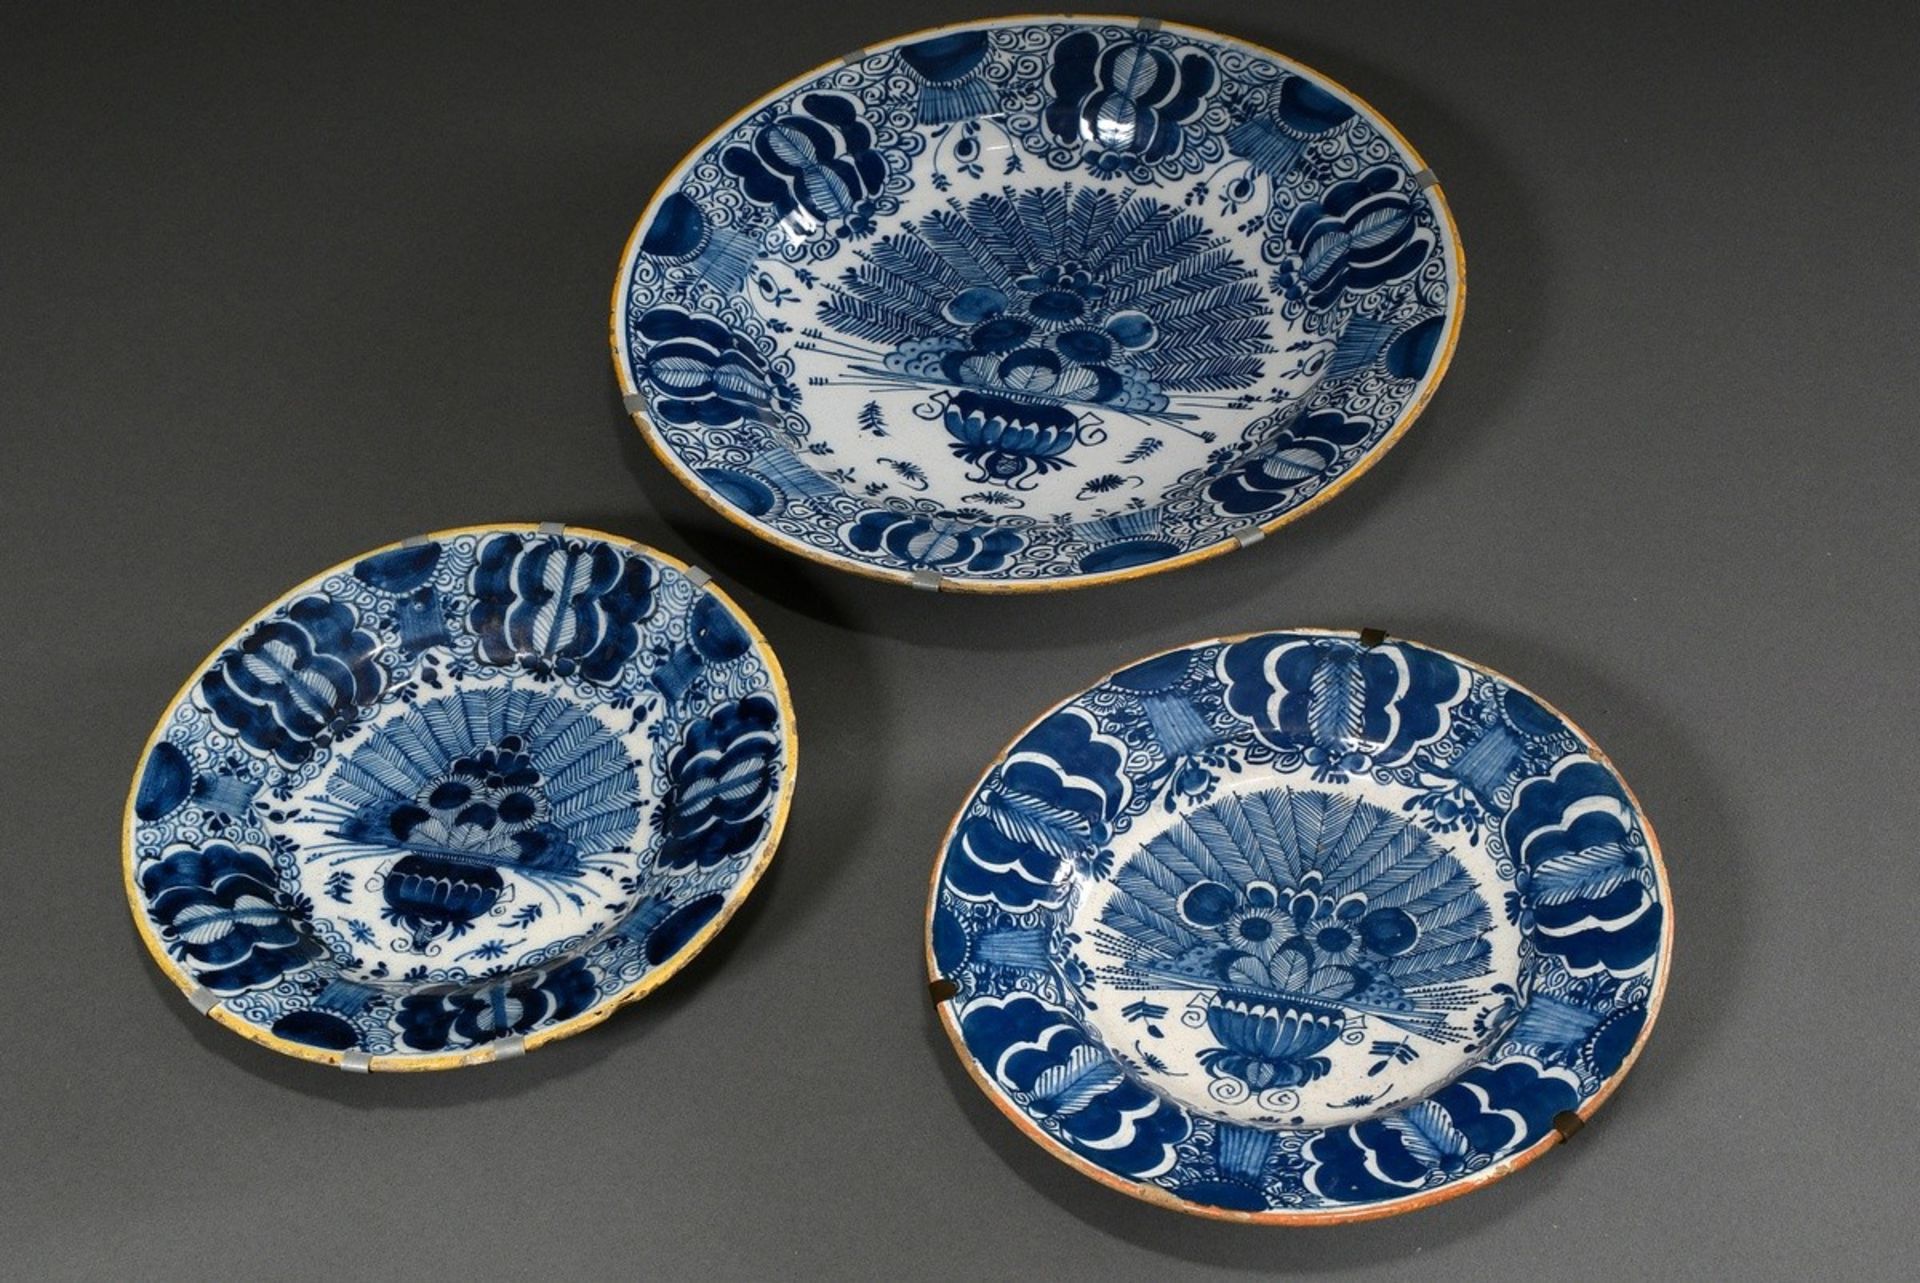 3 Various Delft "Peacock plates" with blue painting decoration and yellow rim: 1x De verguldte Bloe - Image 2 of 5